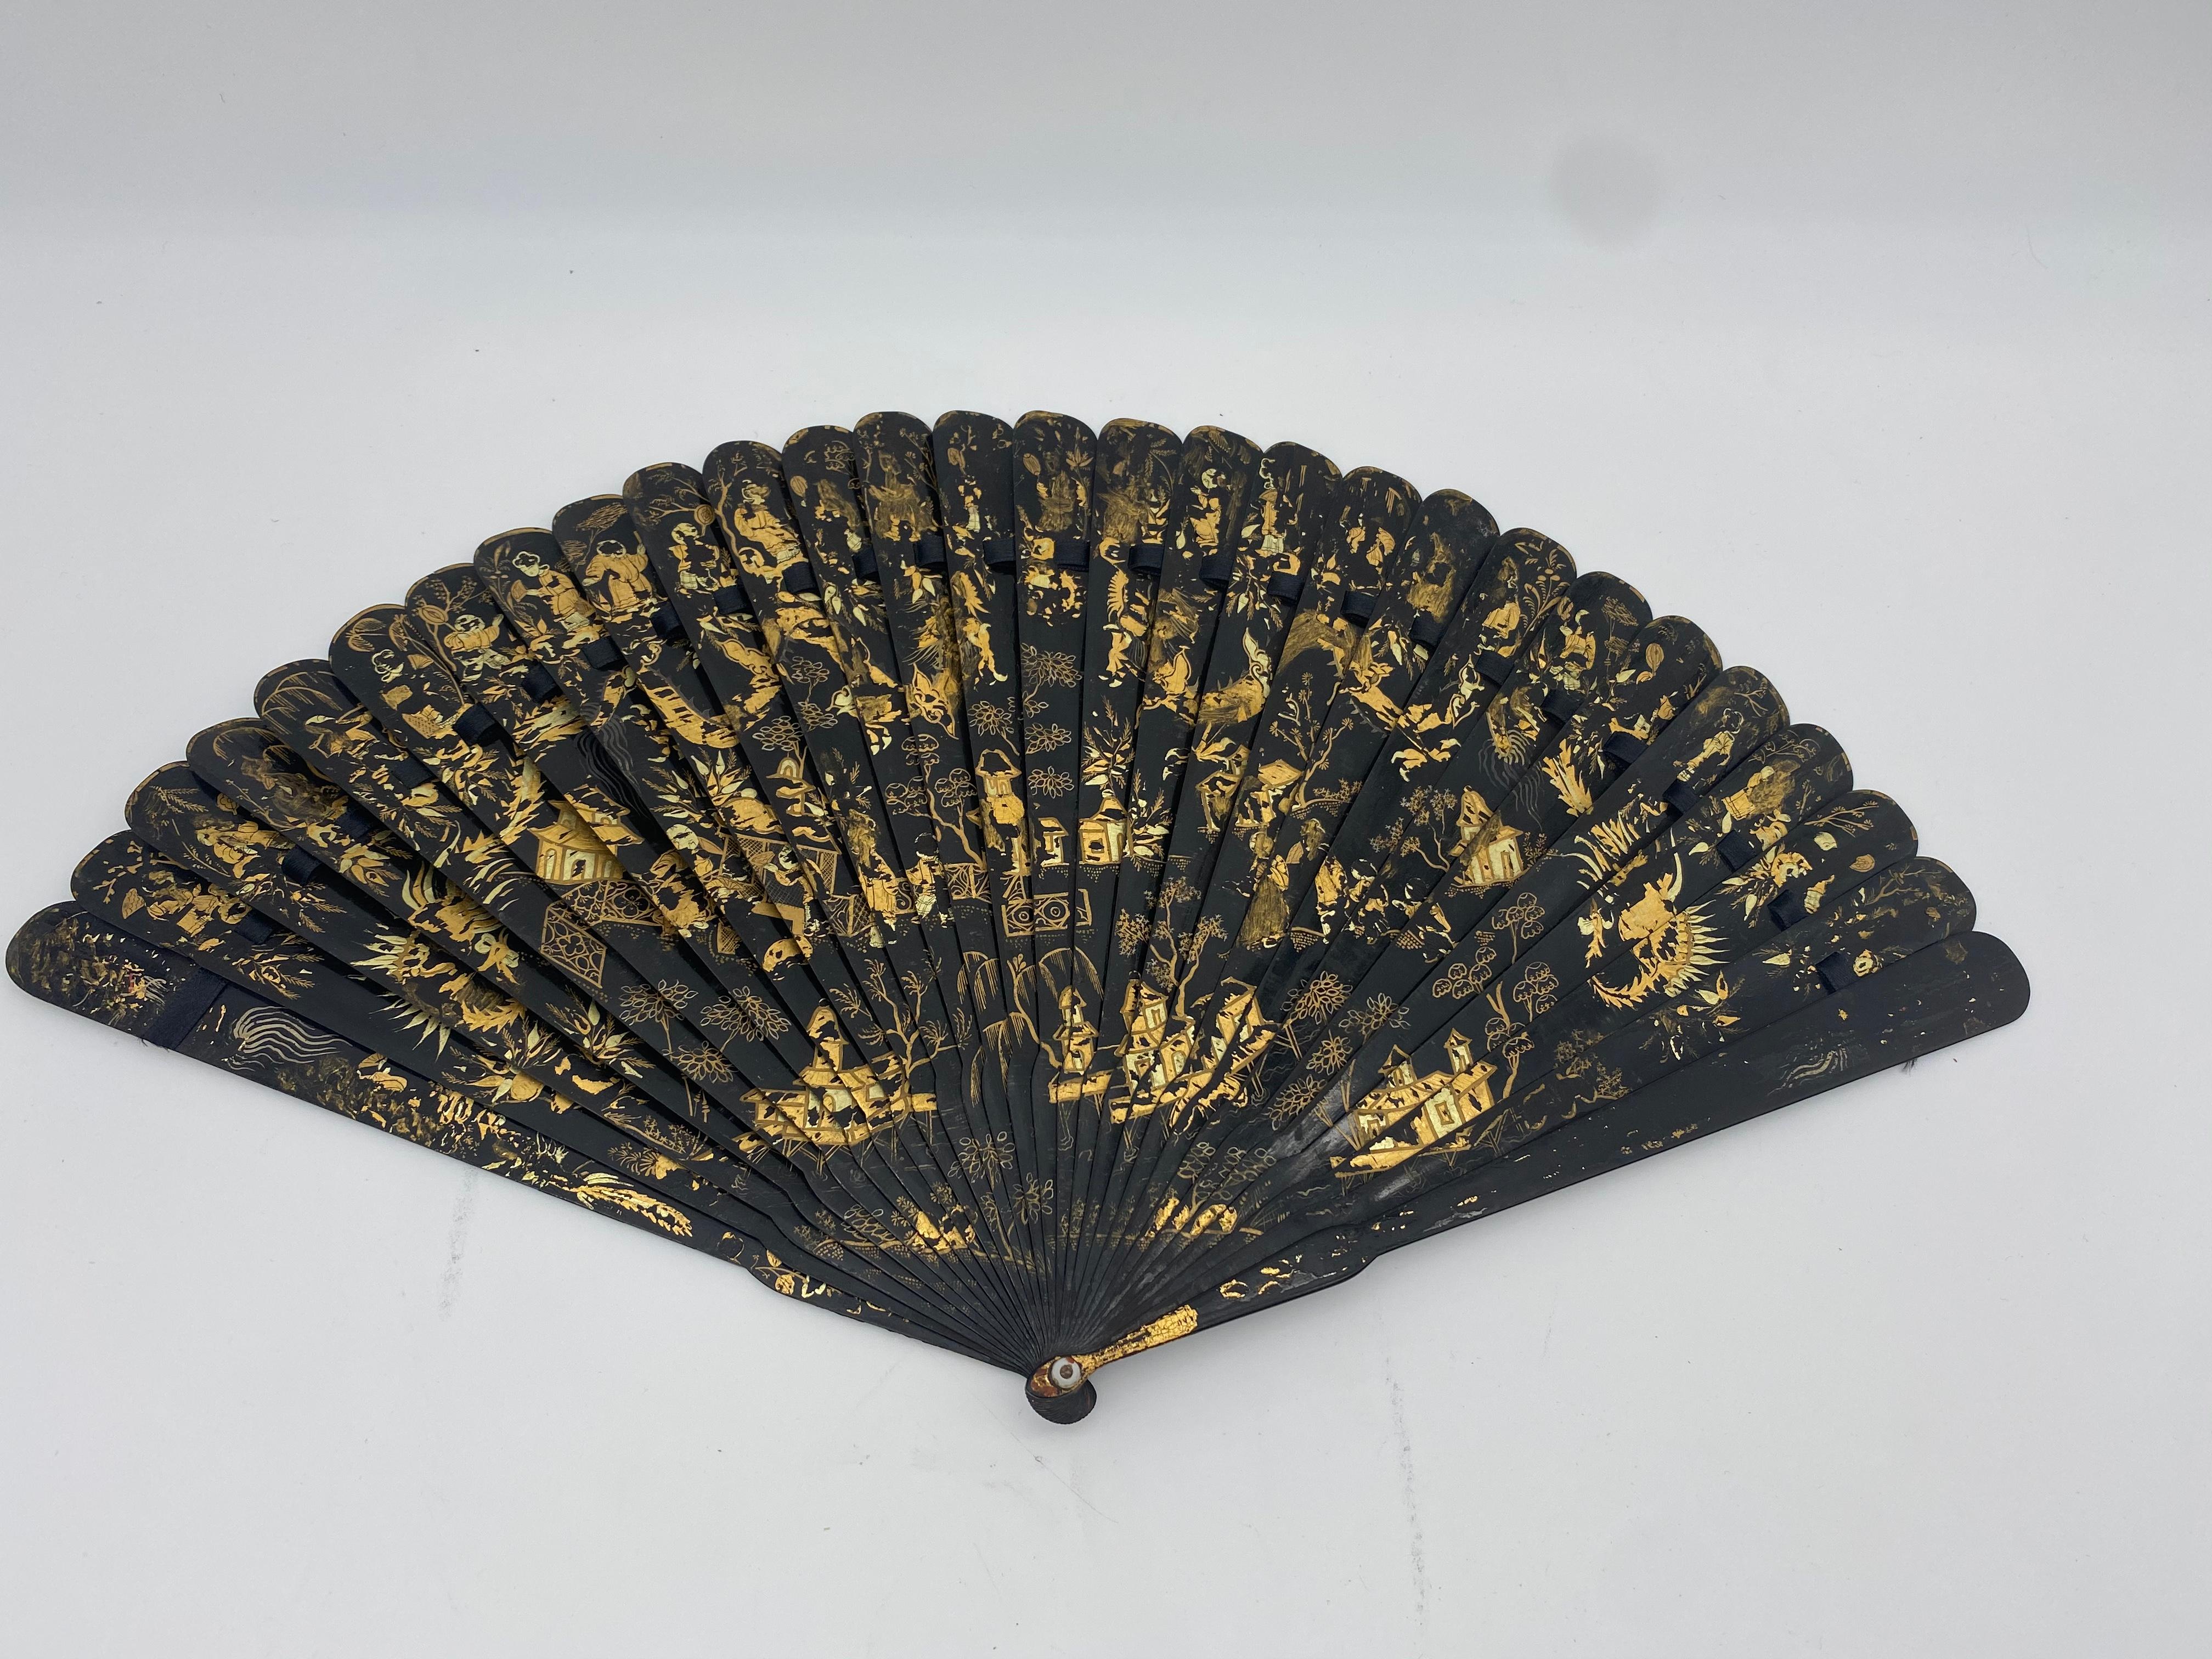 Antique 19th century Chinese canton export gilt lacquer brise fan from the Qing Dynasty.